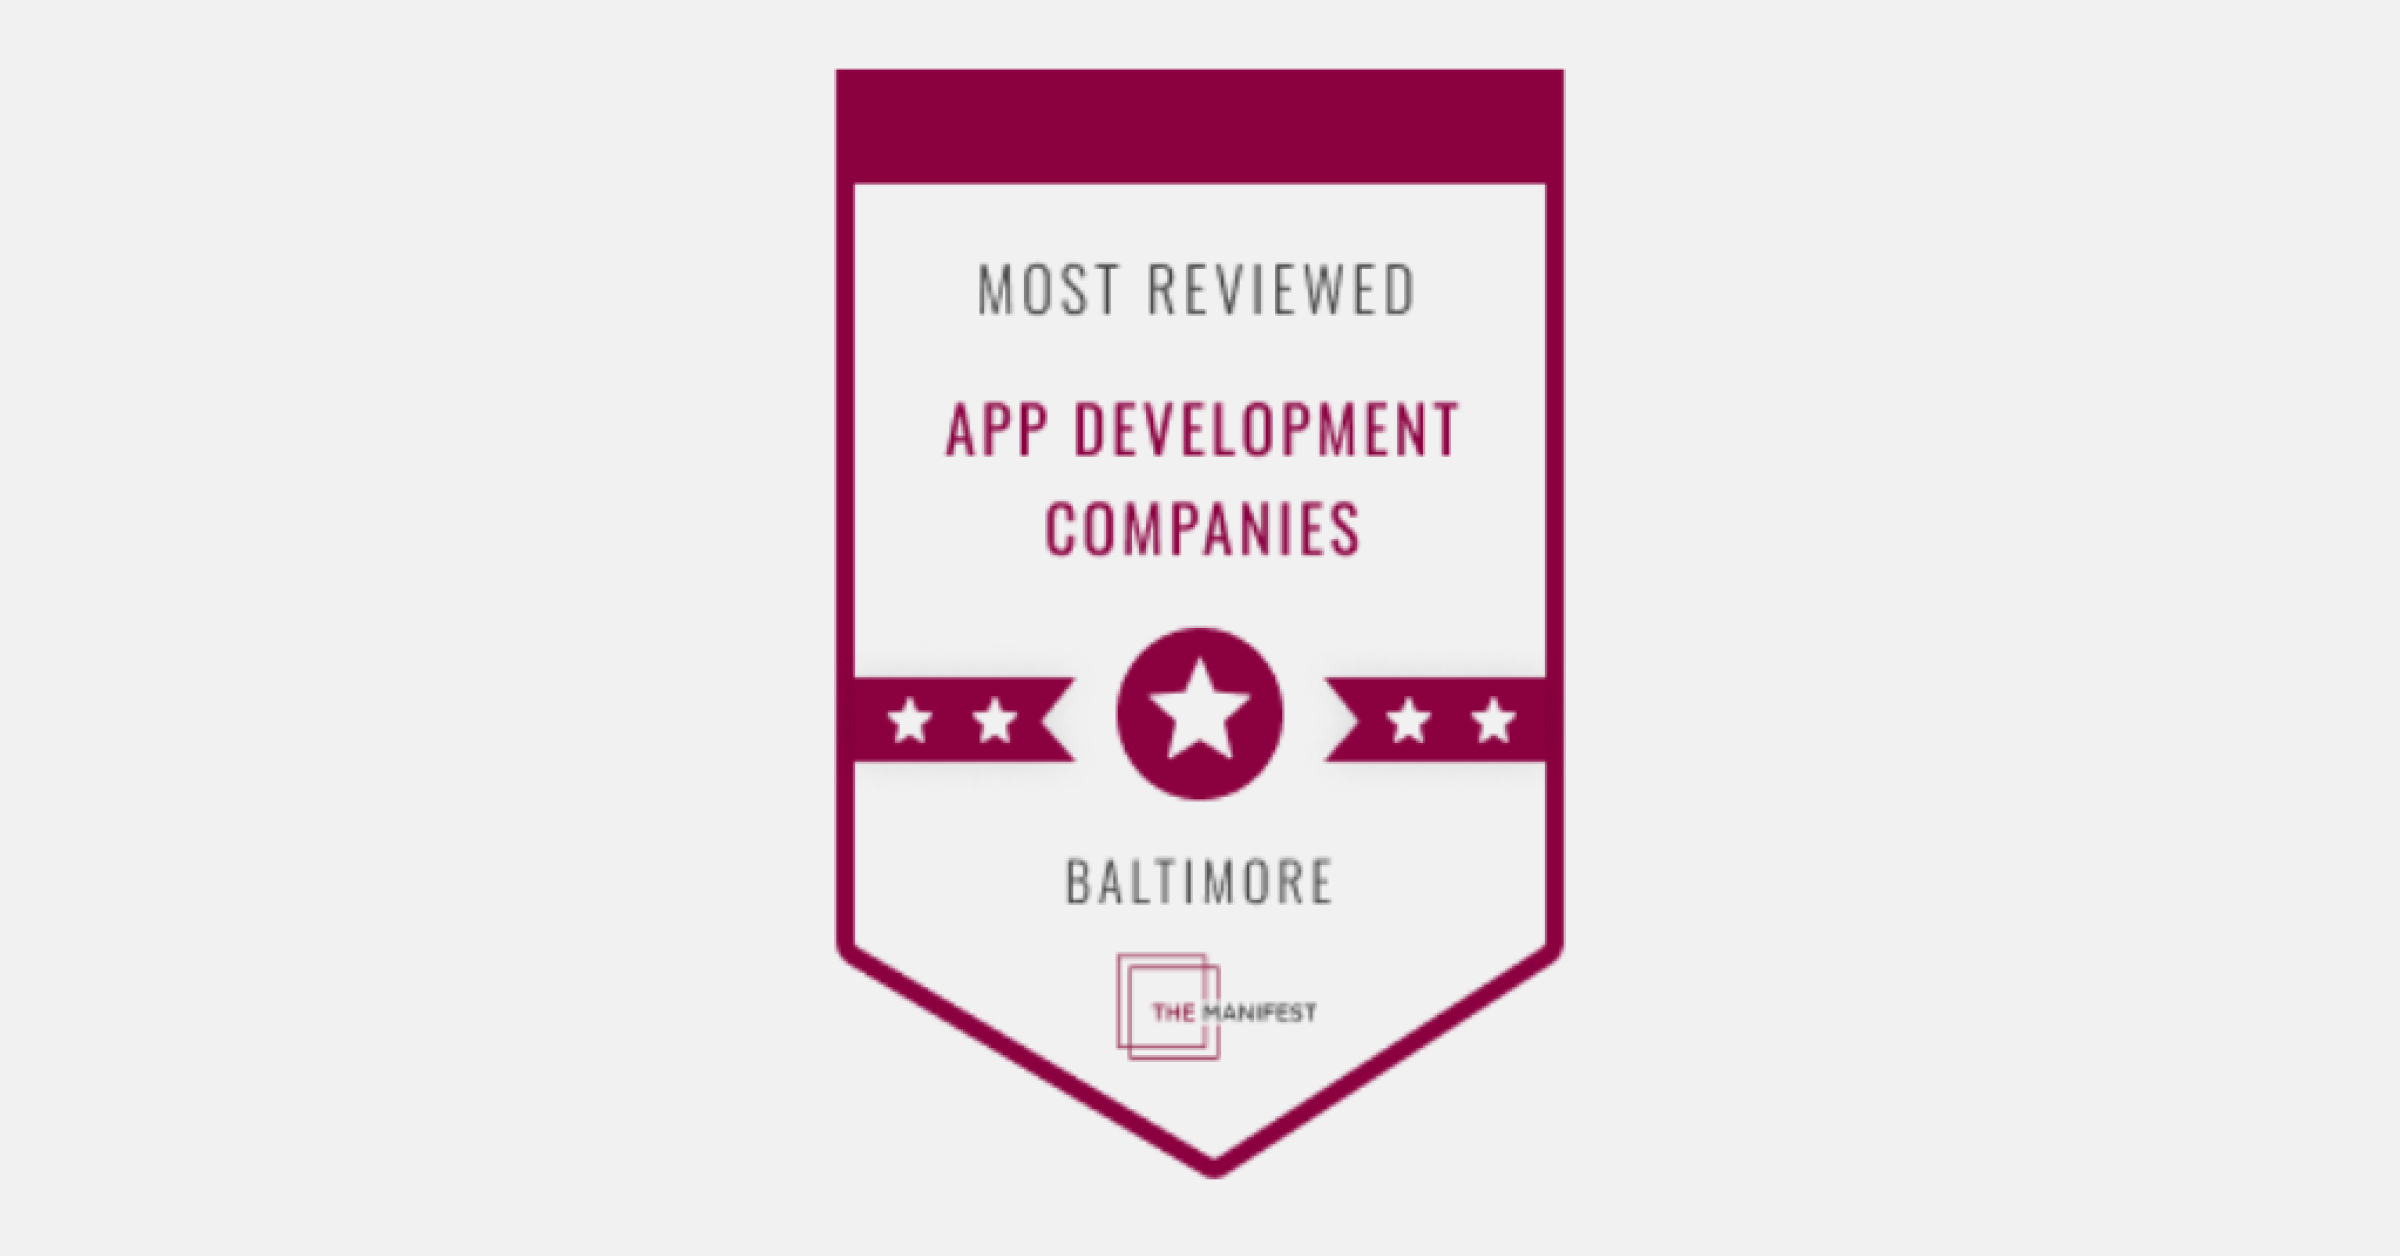 The Manifest Recognizes Code District As a Most Reviewed Service Provider in Baltimore